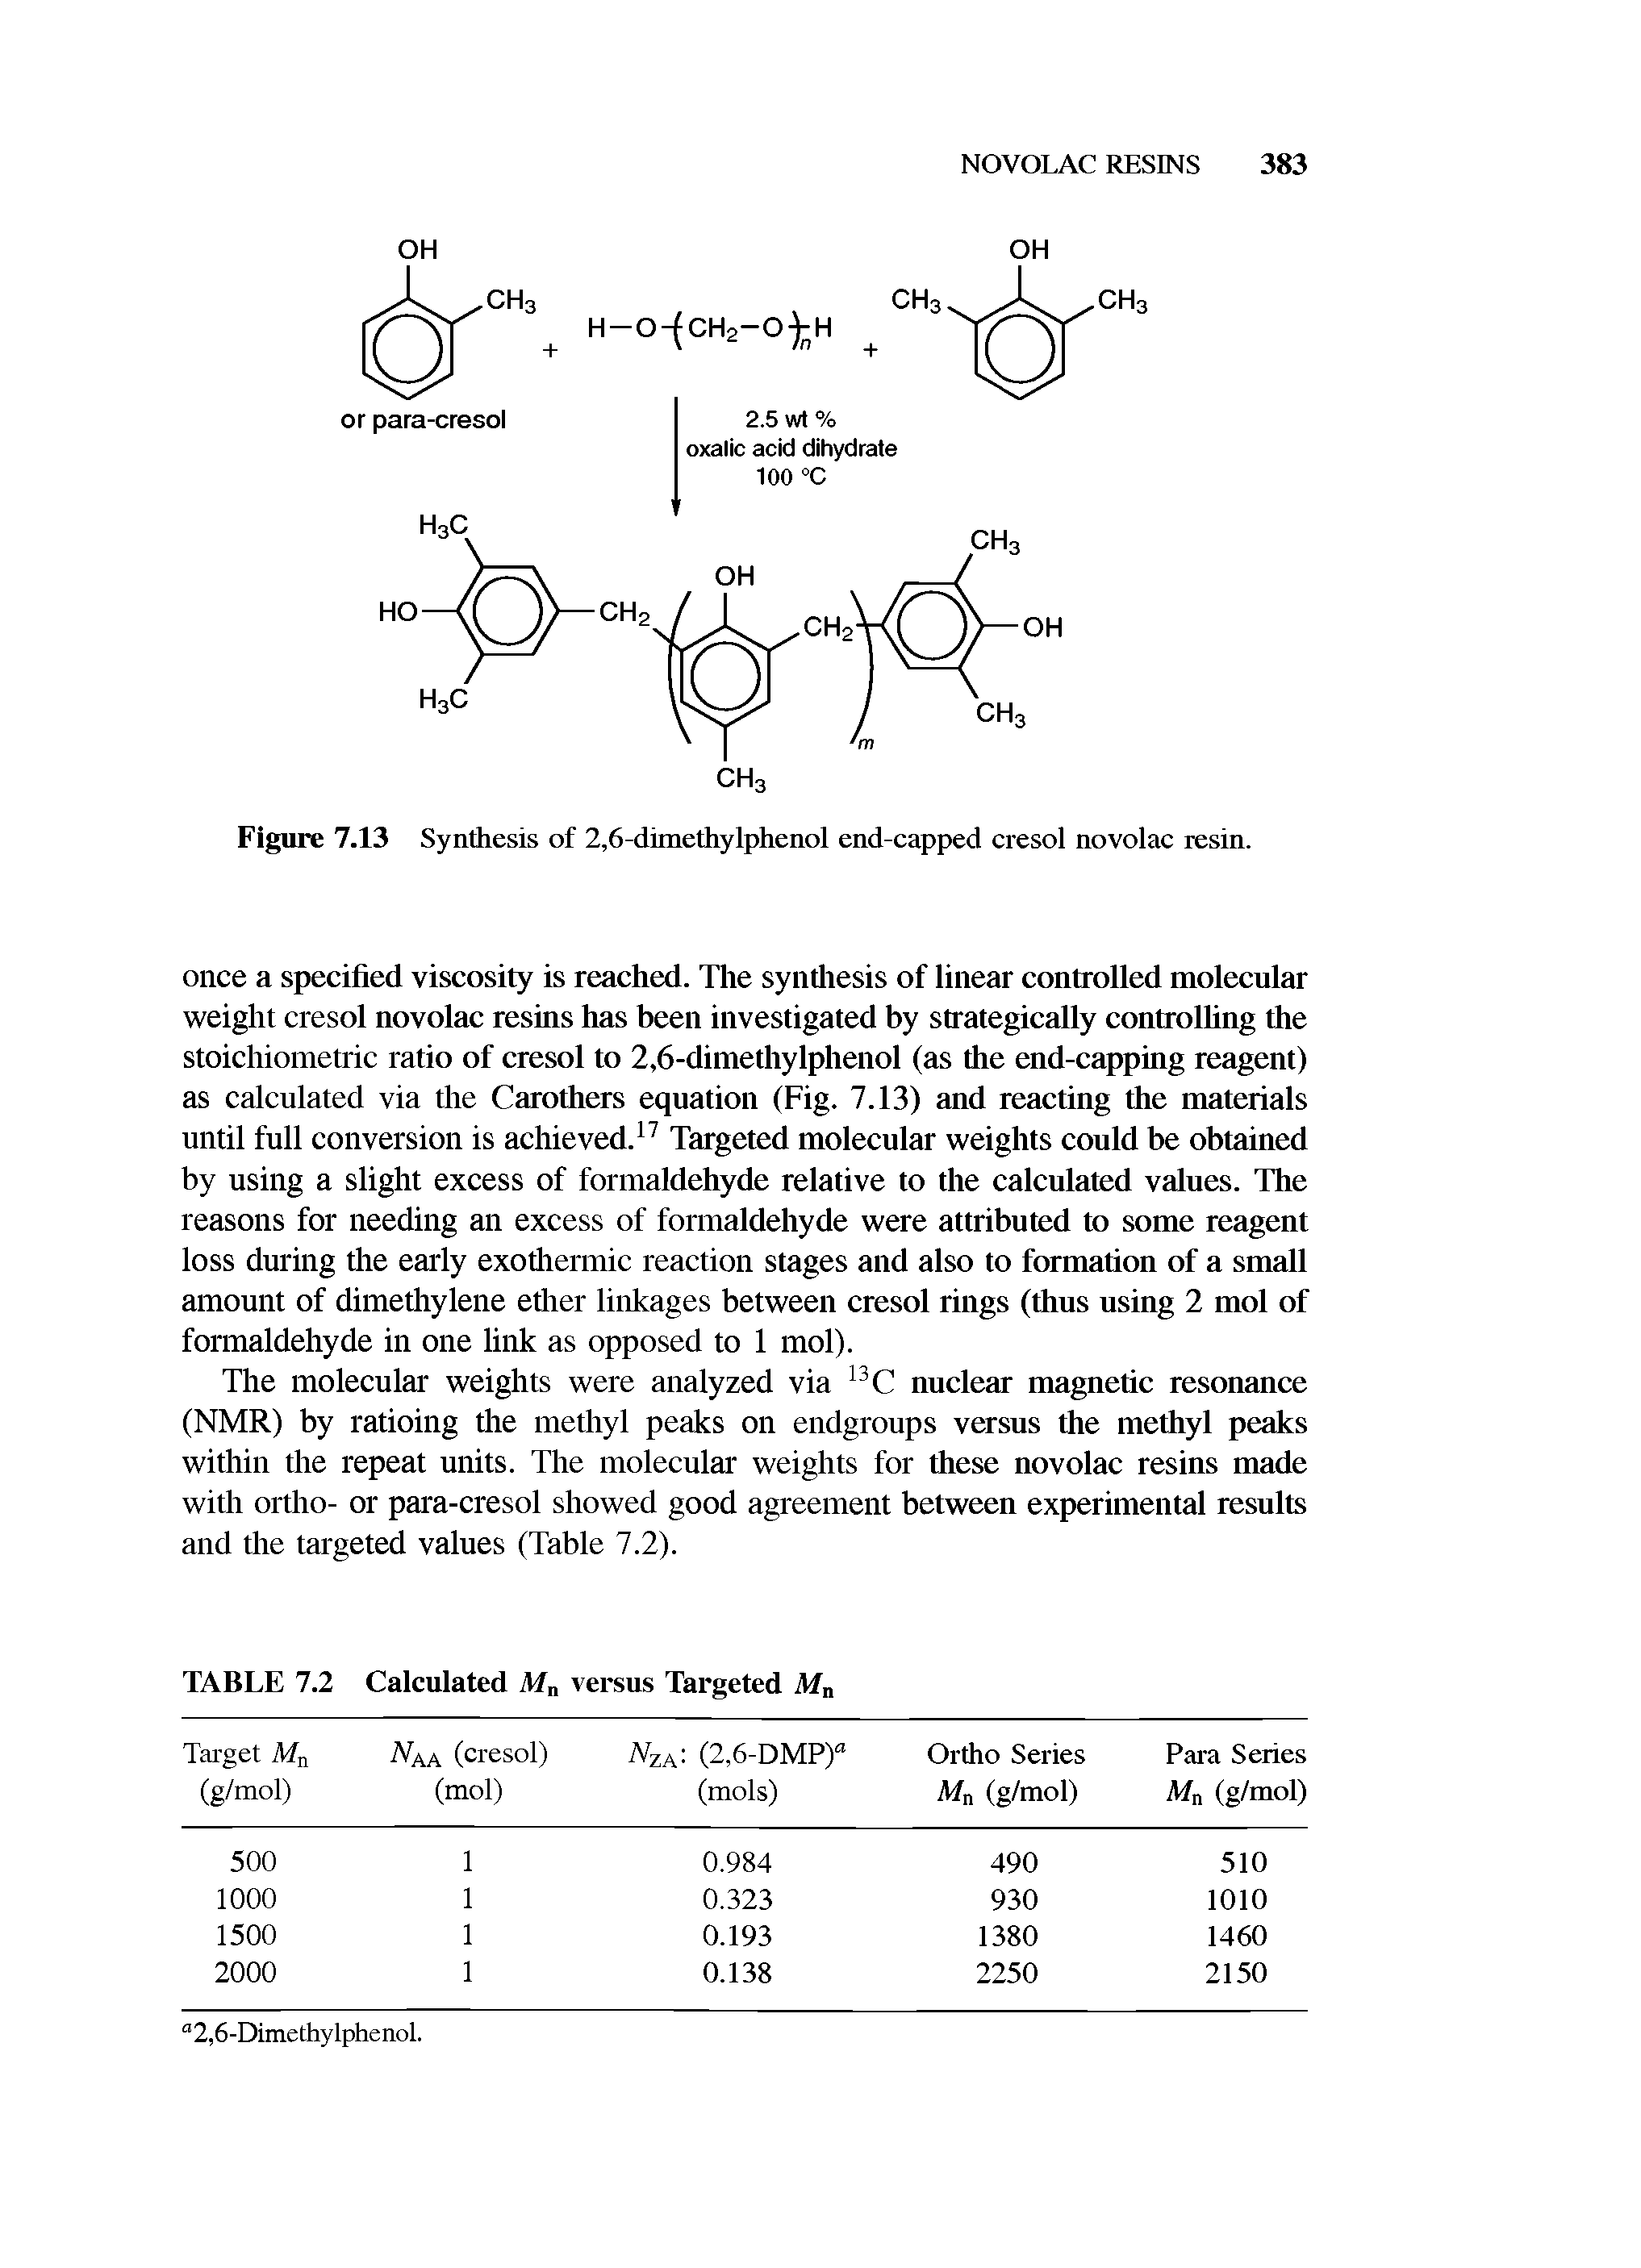 Figure 7.13 Synthesis of 2,6-dimethylphenol end-capped cresol novolac resin.